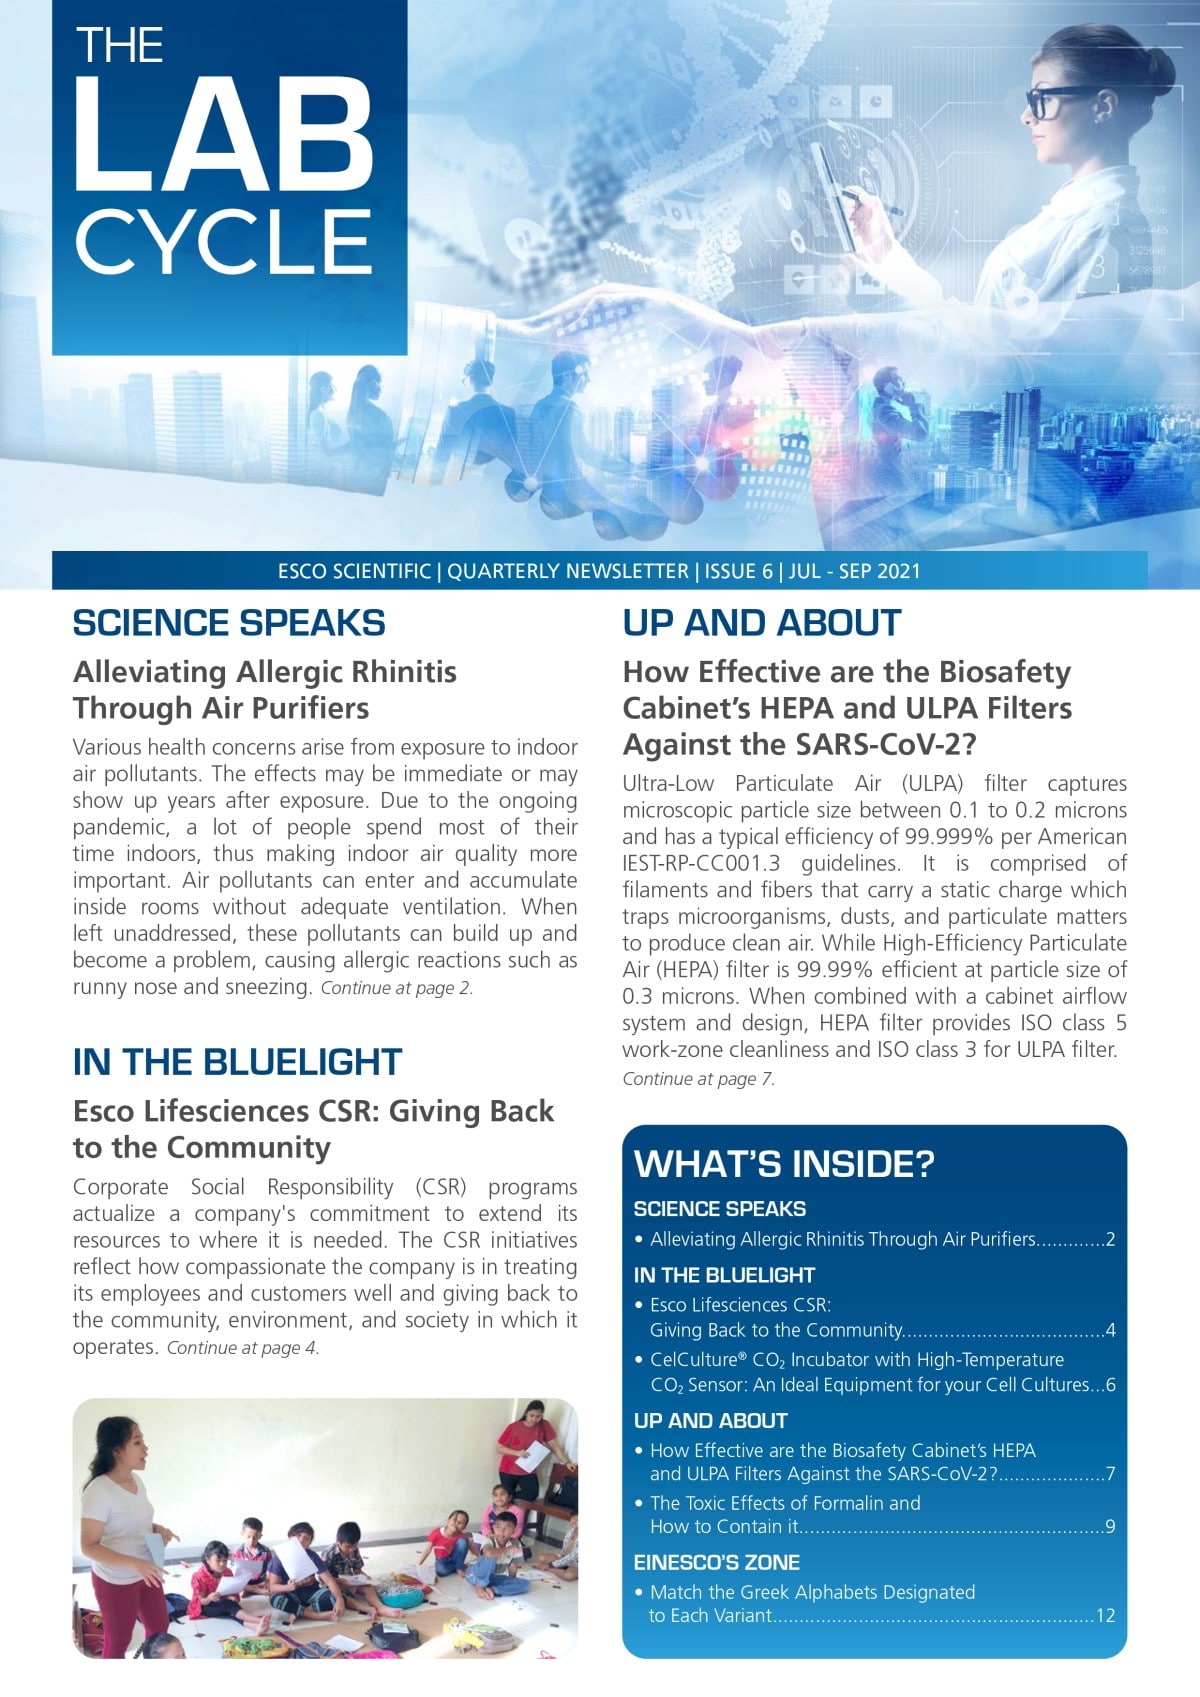 The Lab Cycle: Esco Scientific Quarterly Newsletter - Issue 6, Jul - Sep 2021